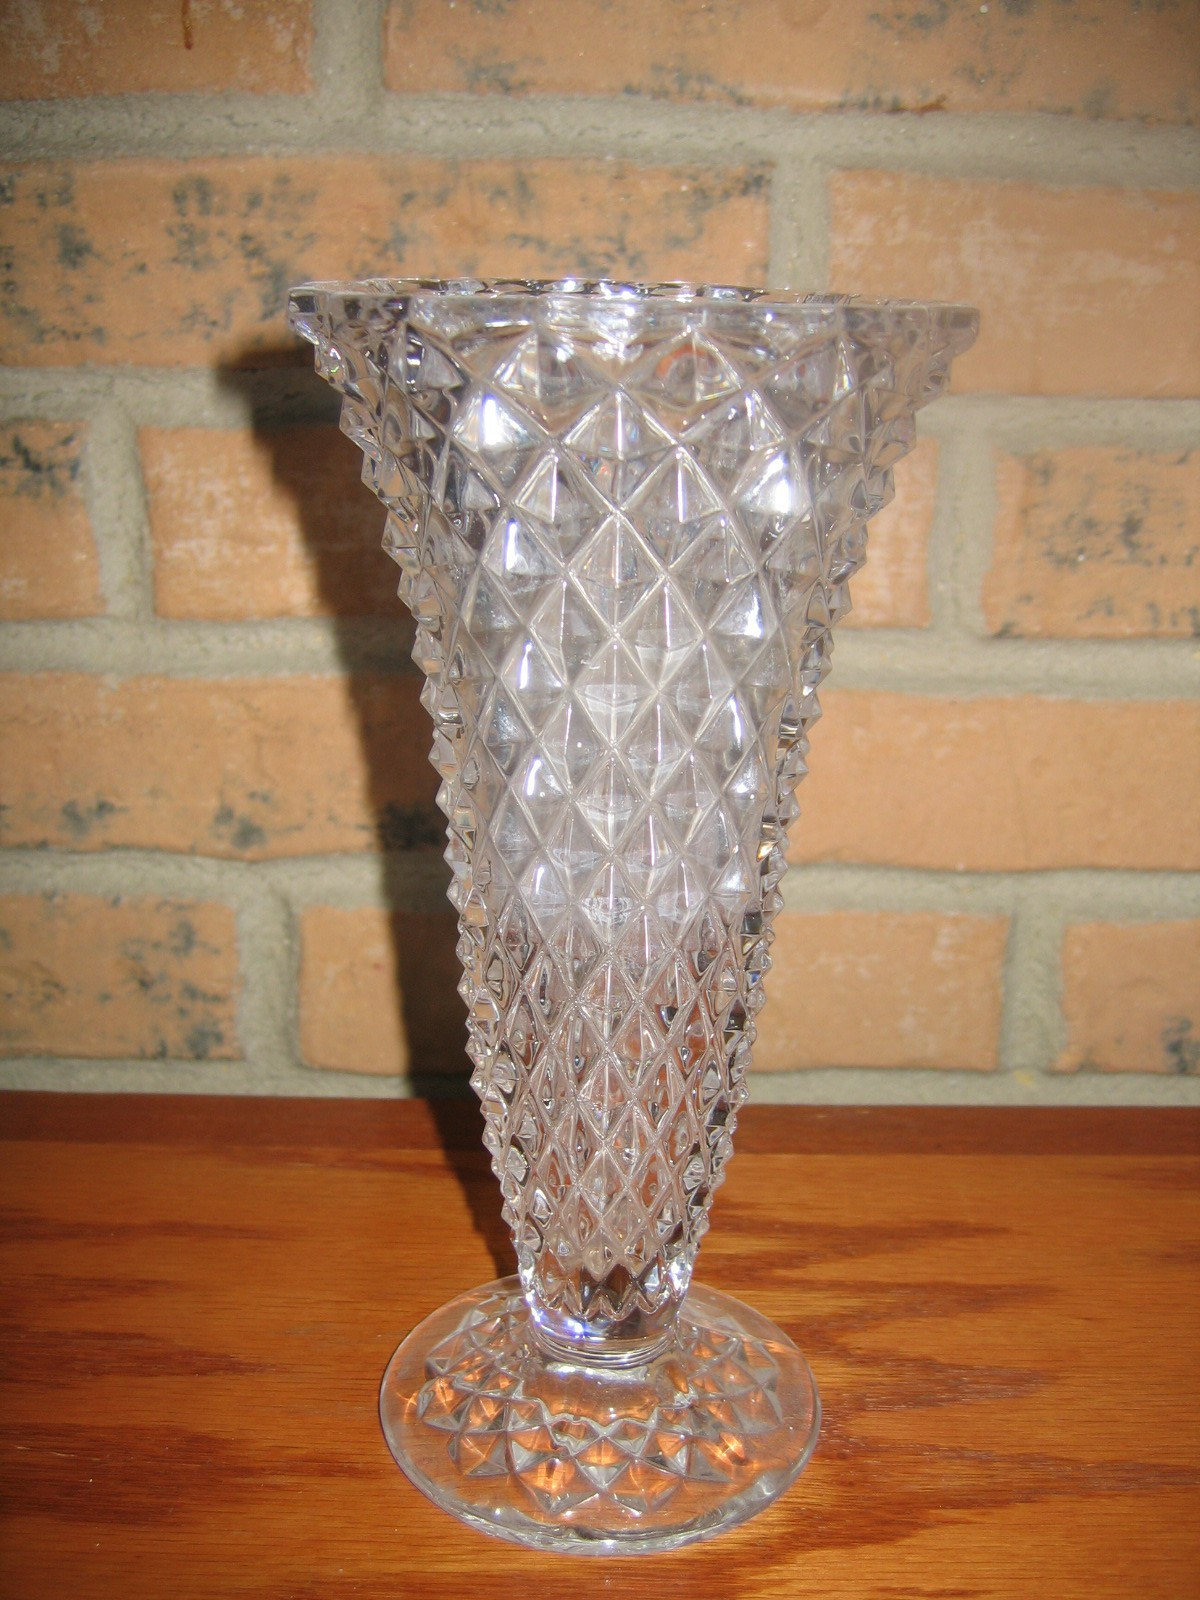 27 attractive Bohemia Crystal Vase Price 2024 free download bohemia crystal vase price of lead crystal vases stock bohemia czech republic lead crystal vase by with regard to lead crystal vases pics glass vase decoration ideas will clipart colored flo